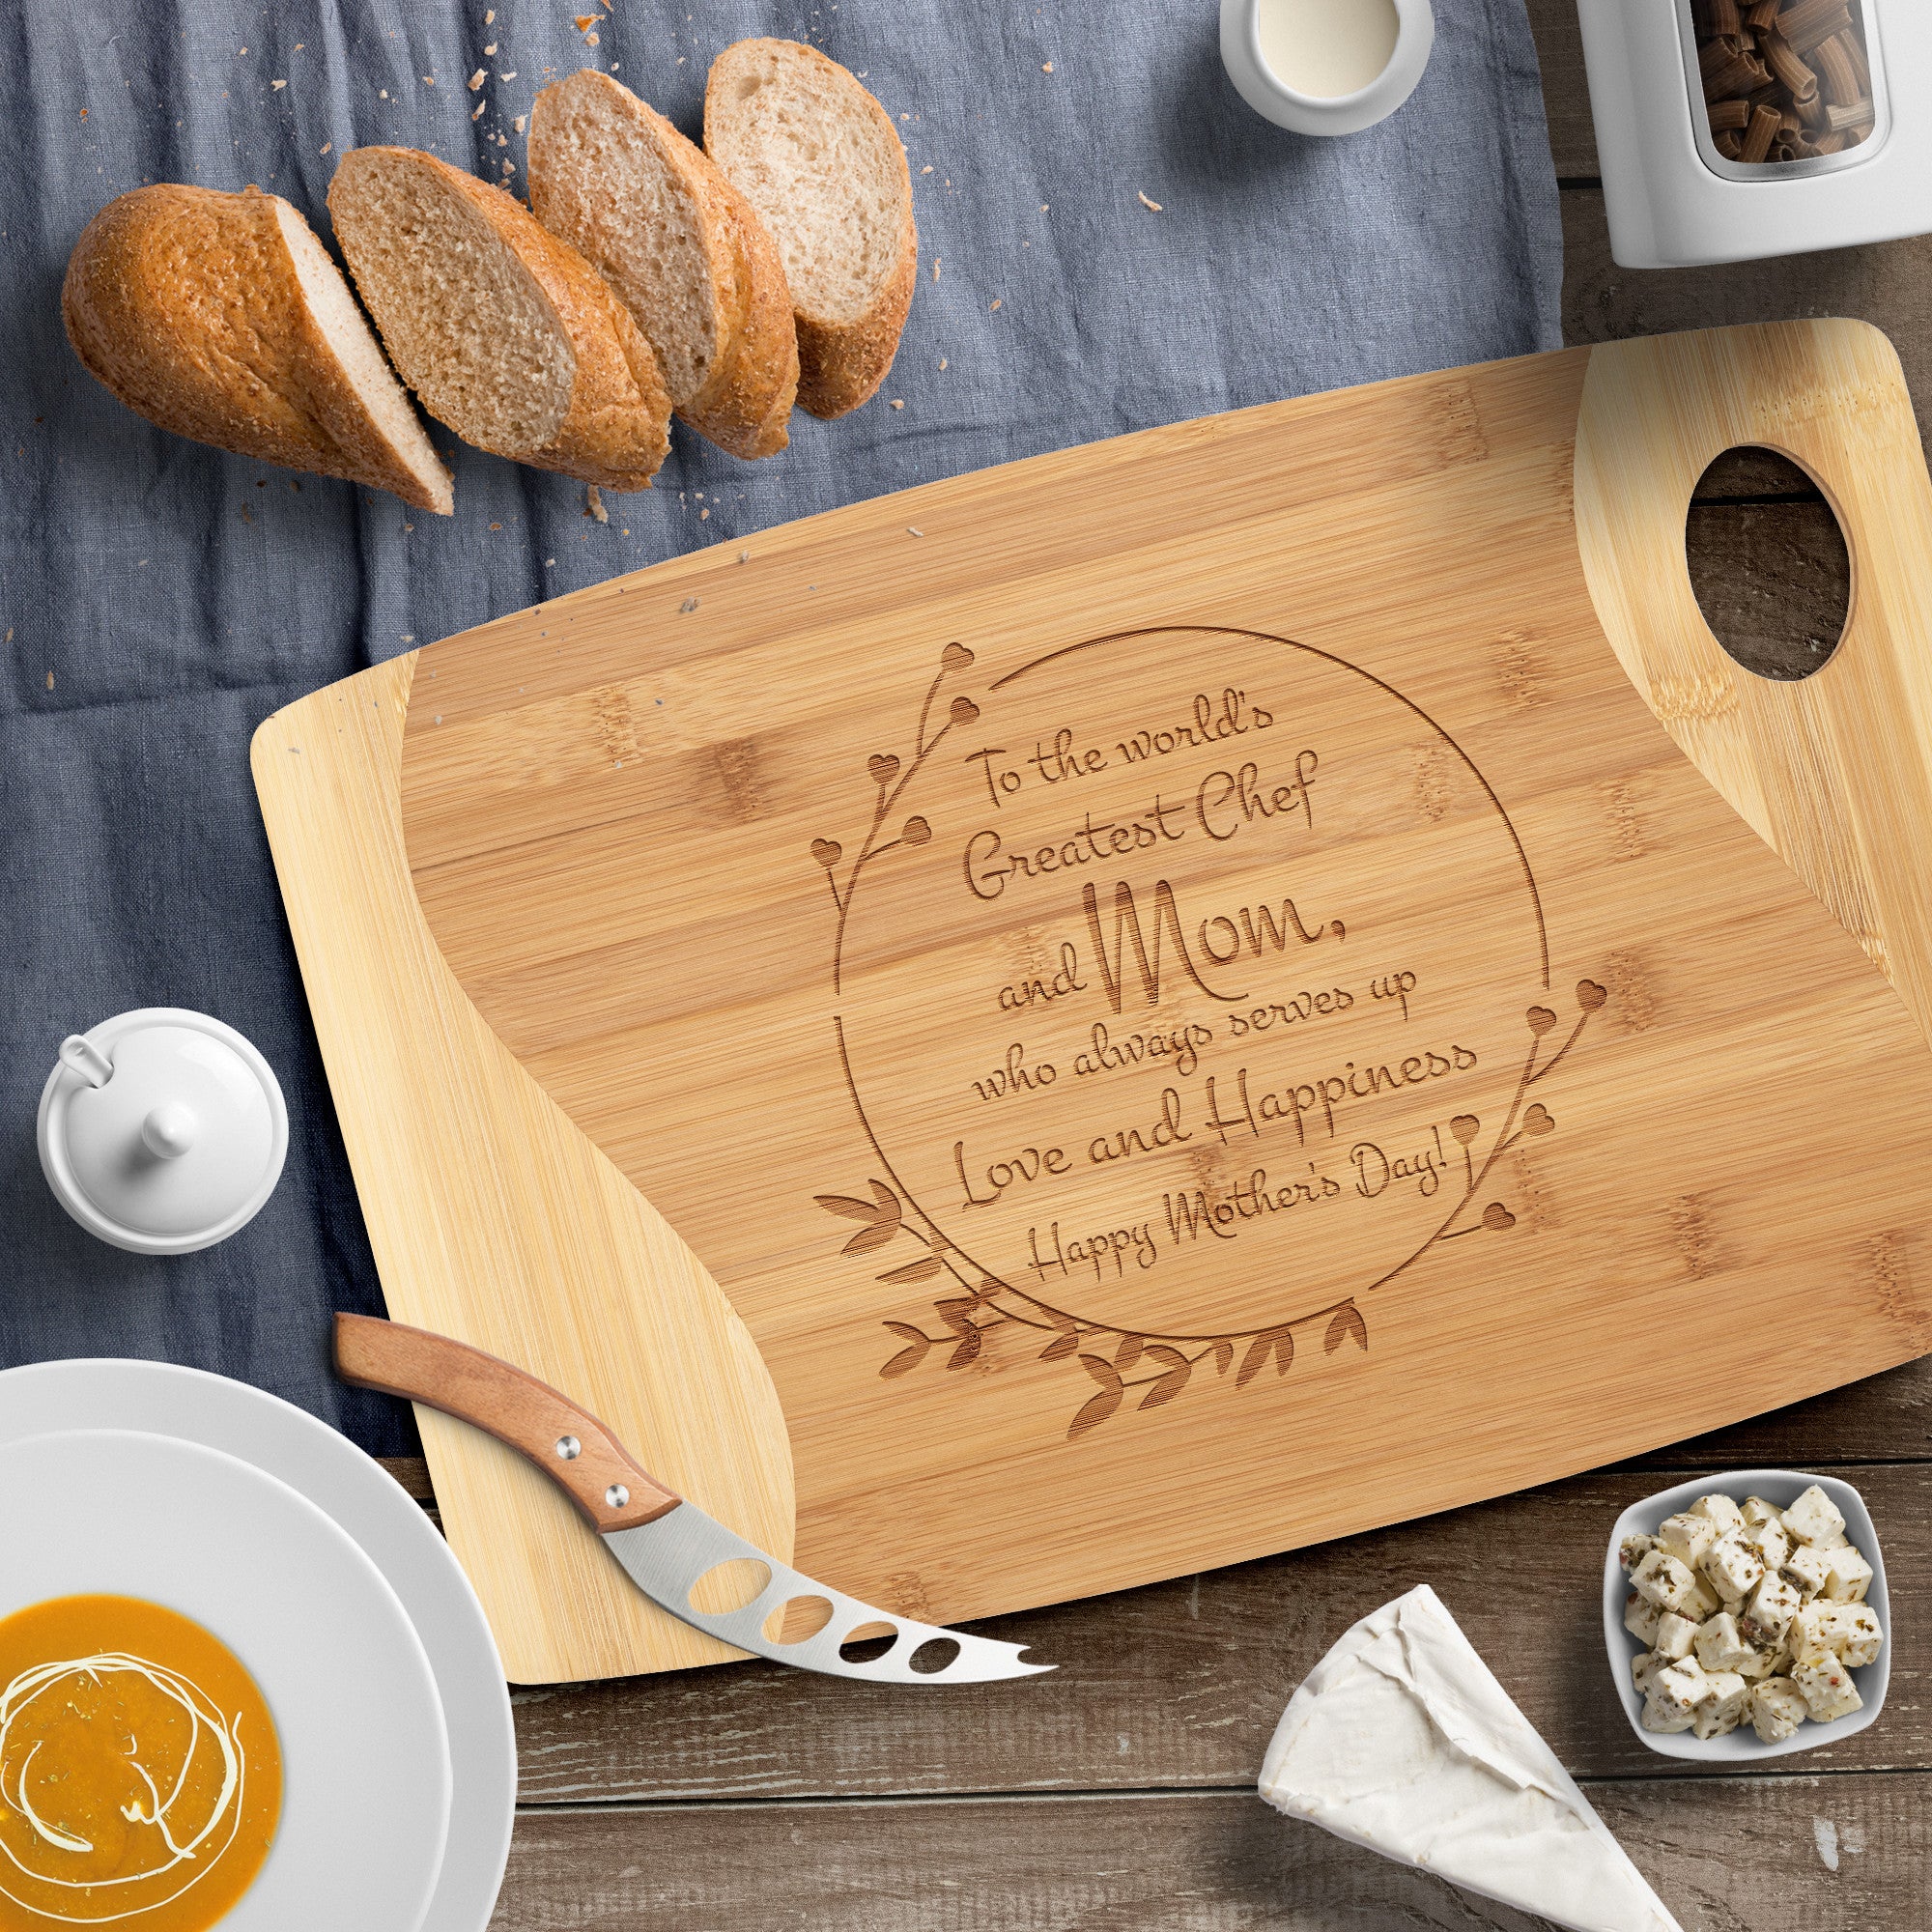 World's Greatest Chef and Mom - Cutting Board for Mother's Day